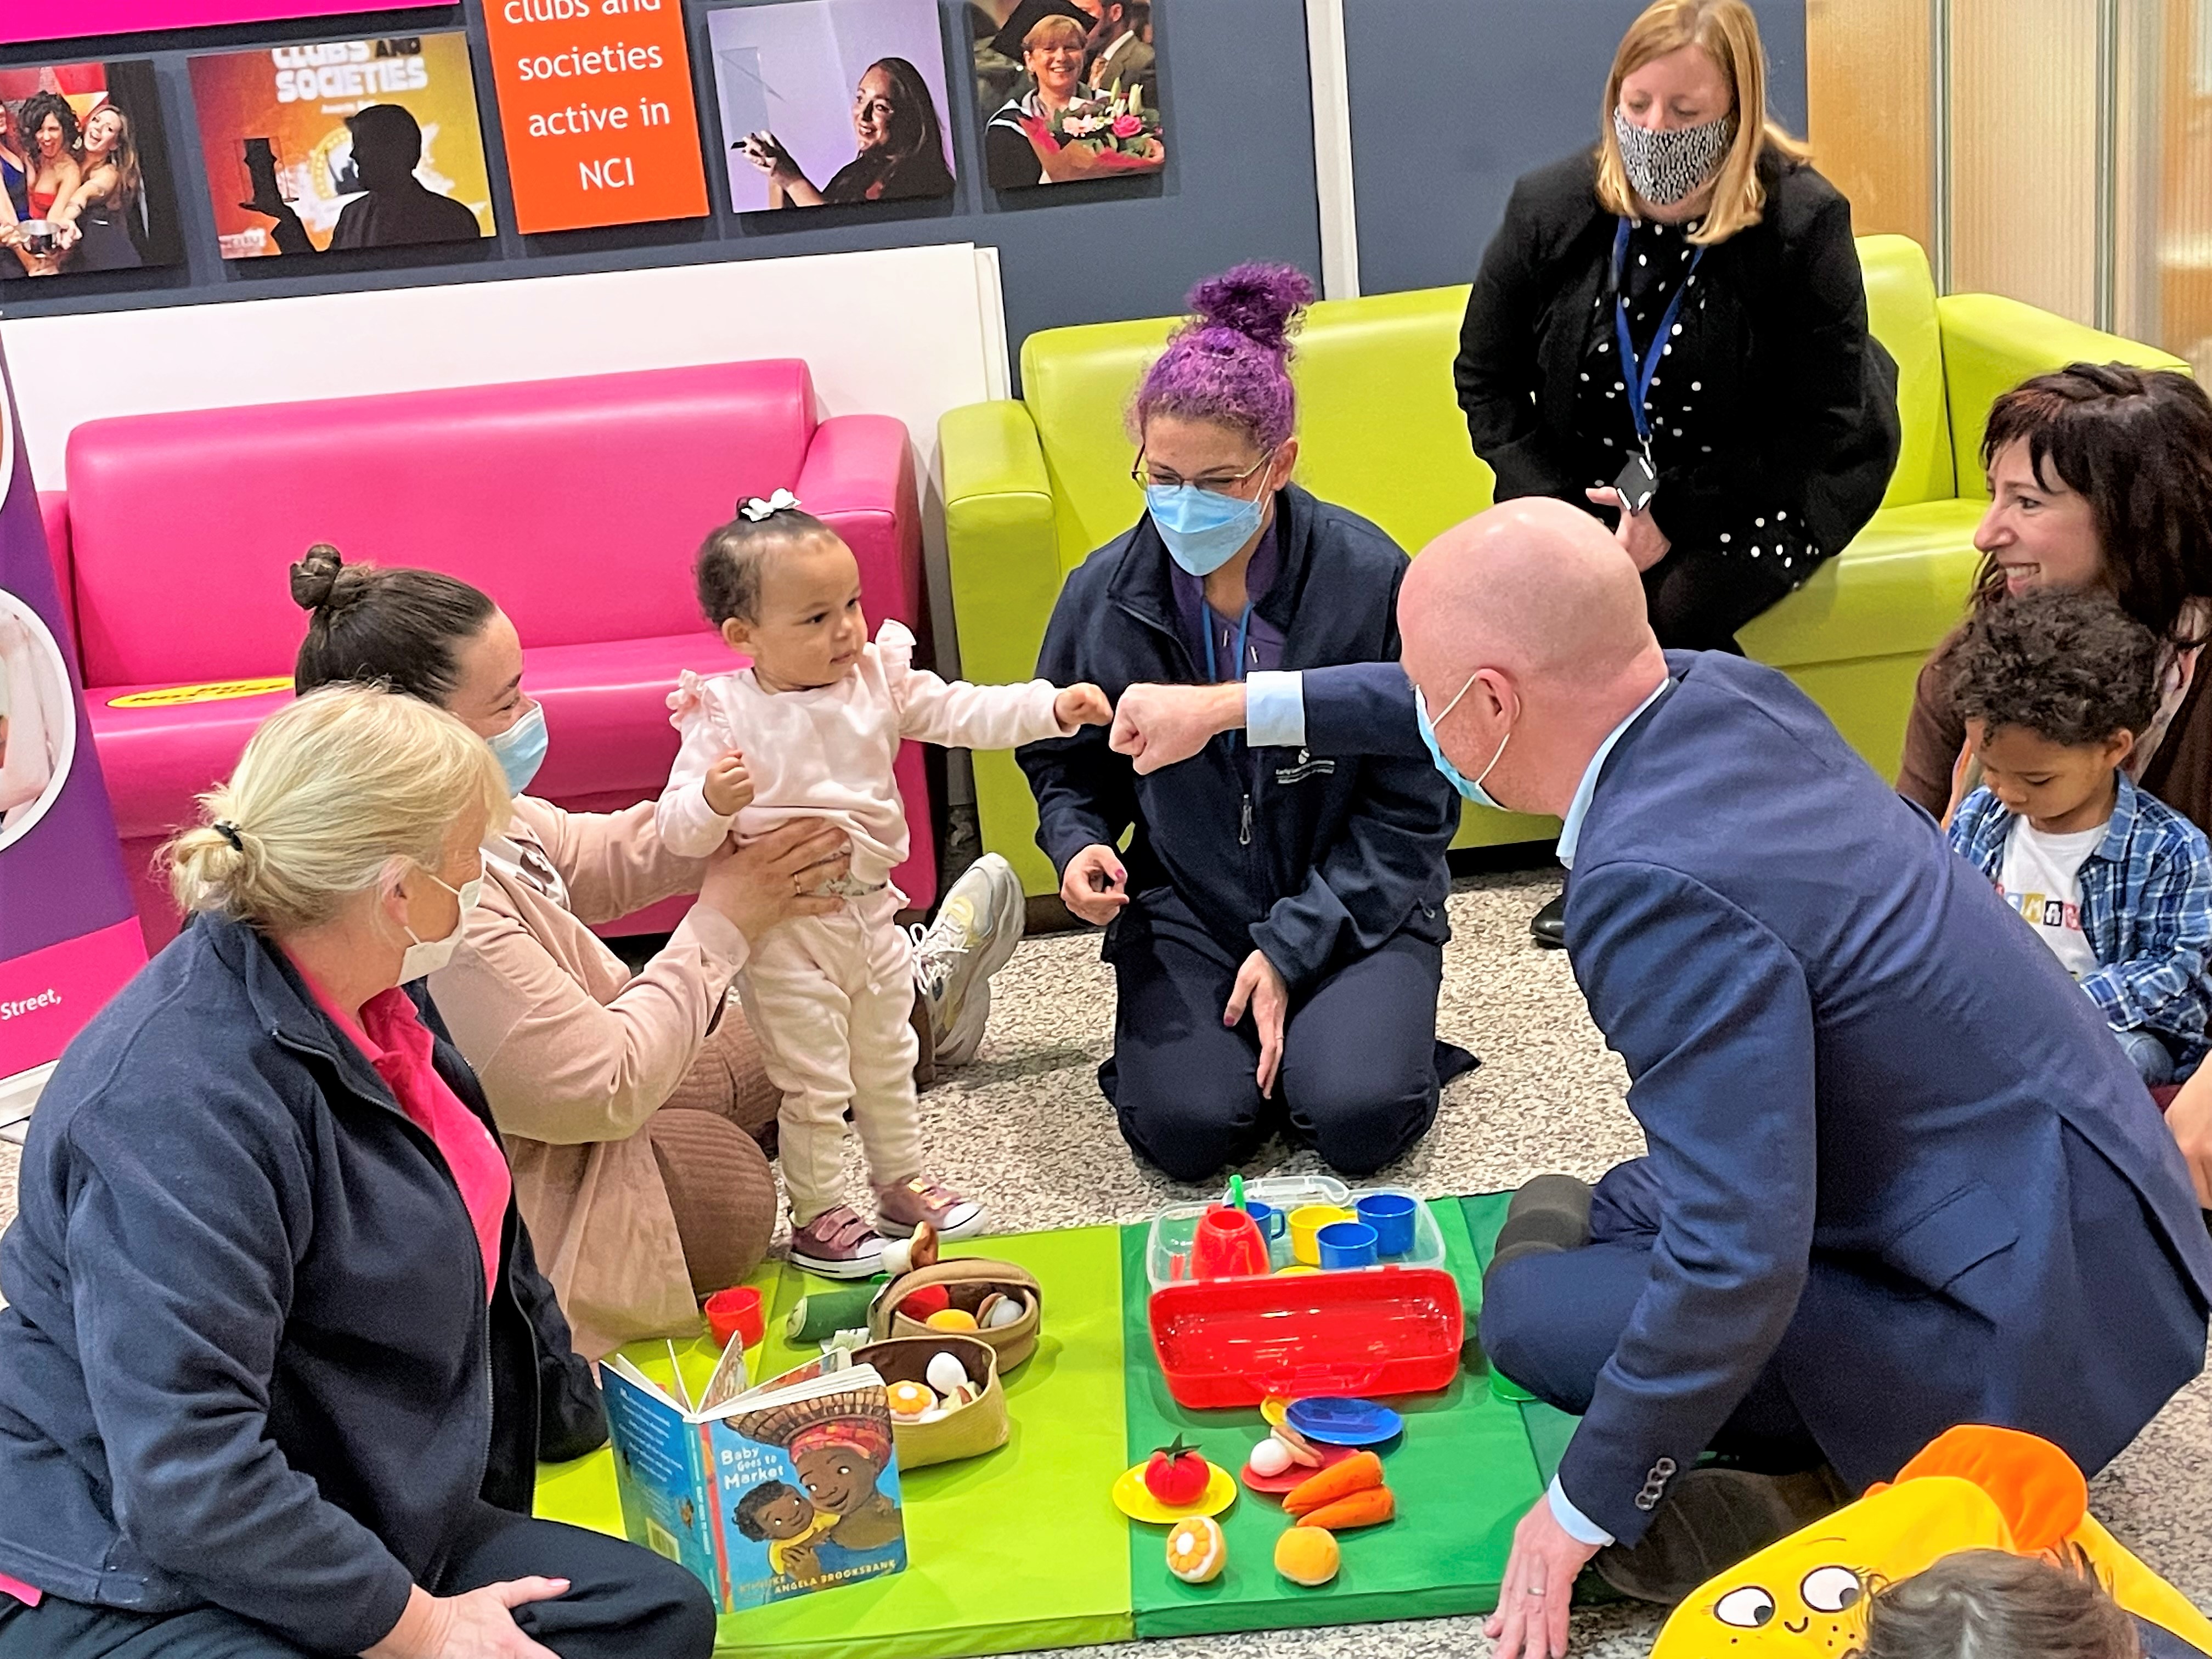 Minister for Health Stephen Donnelly with NEIC families - 17-month old Luna Rose fist bumps the minister.